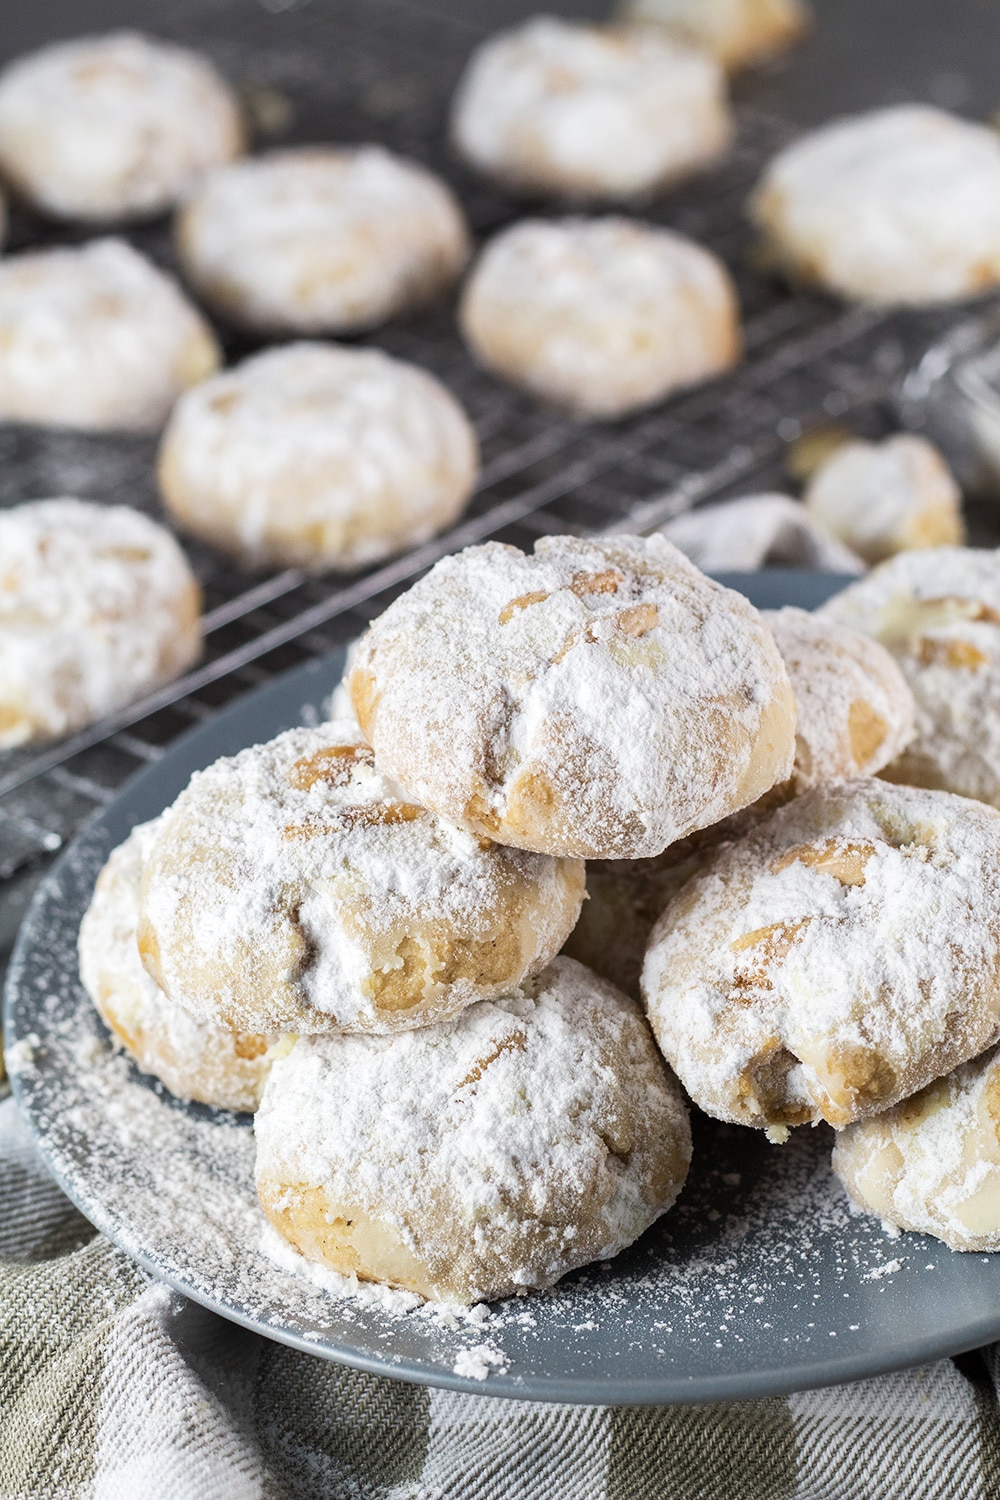 These Mexican Wedding Cookies are buttery, crumbly, nutty, and topped with whole almonds. Perfect with a mug of hot cocoa or a cup of milk, tea, or coffee! | cookingtheglobe.com